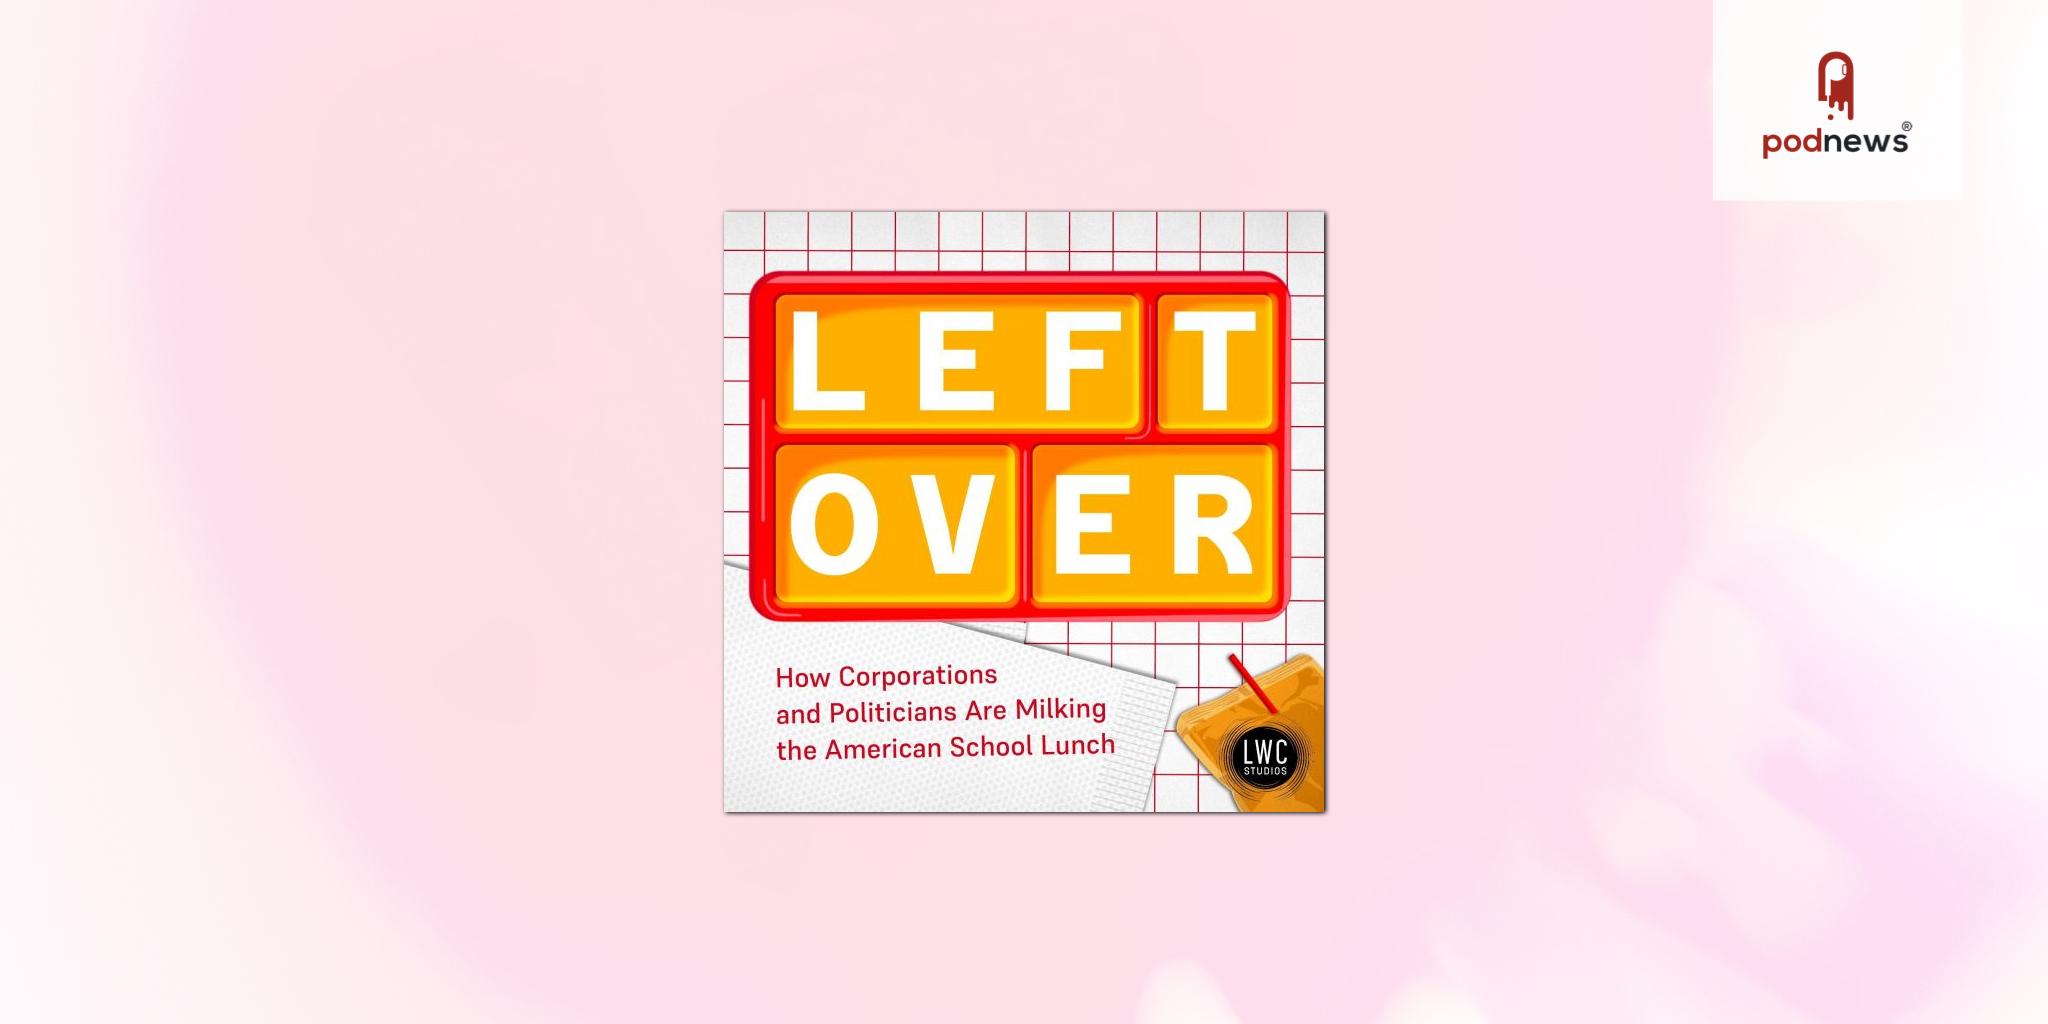 Introducing “Left Over: How Corporations and Politicians Are Milking the American School Lunch”